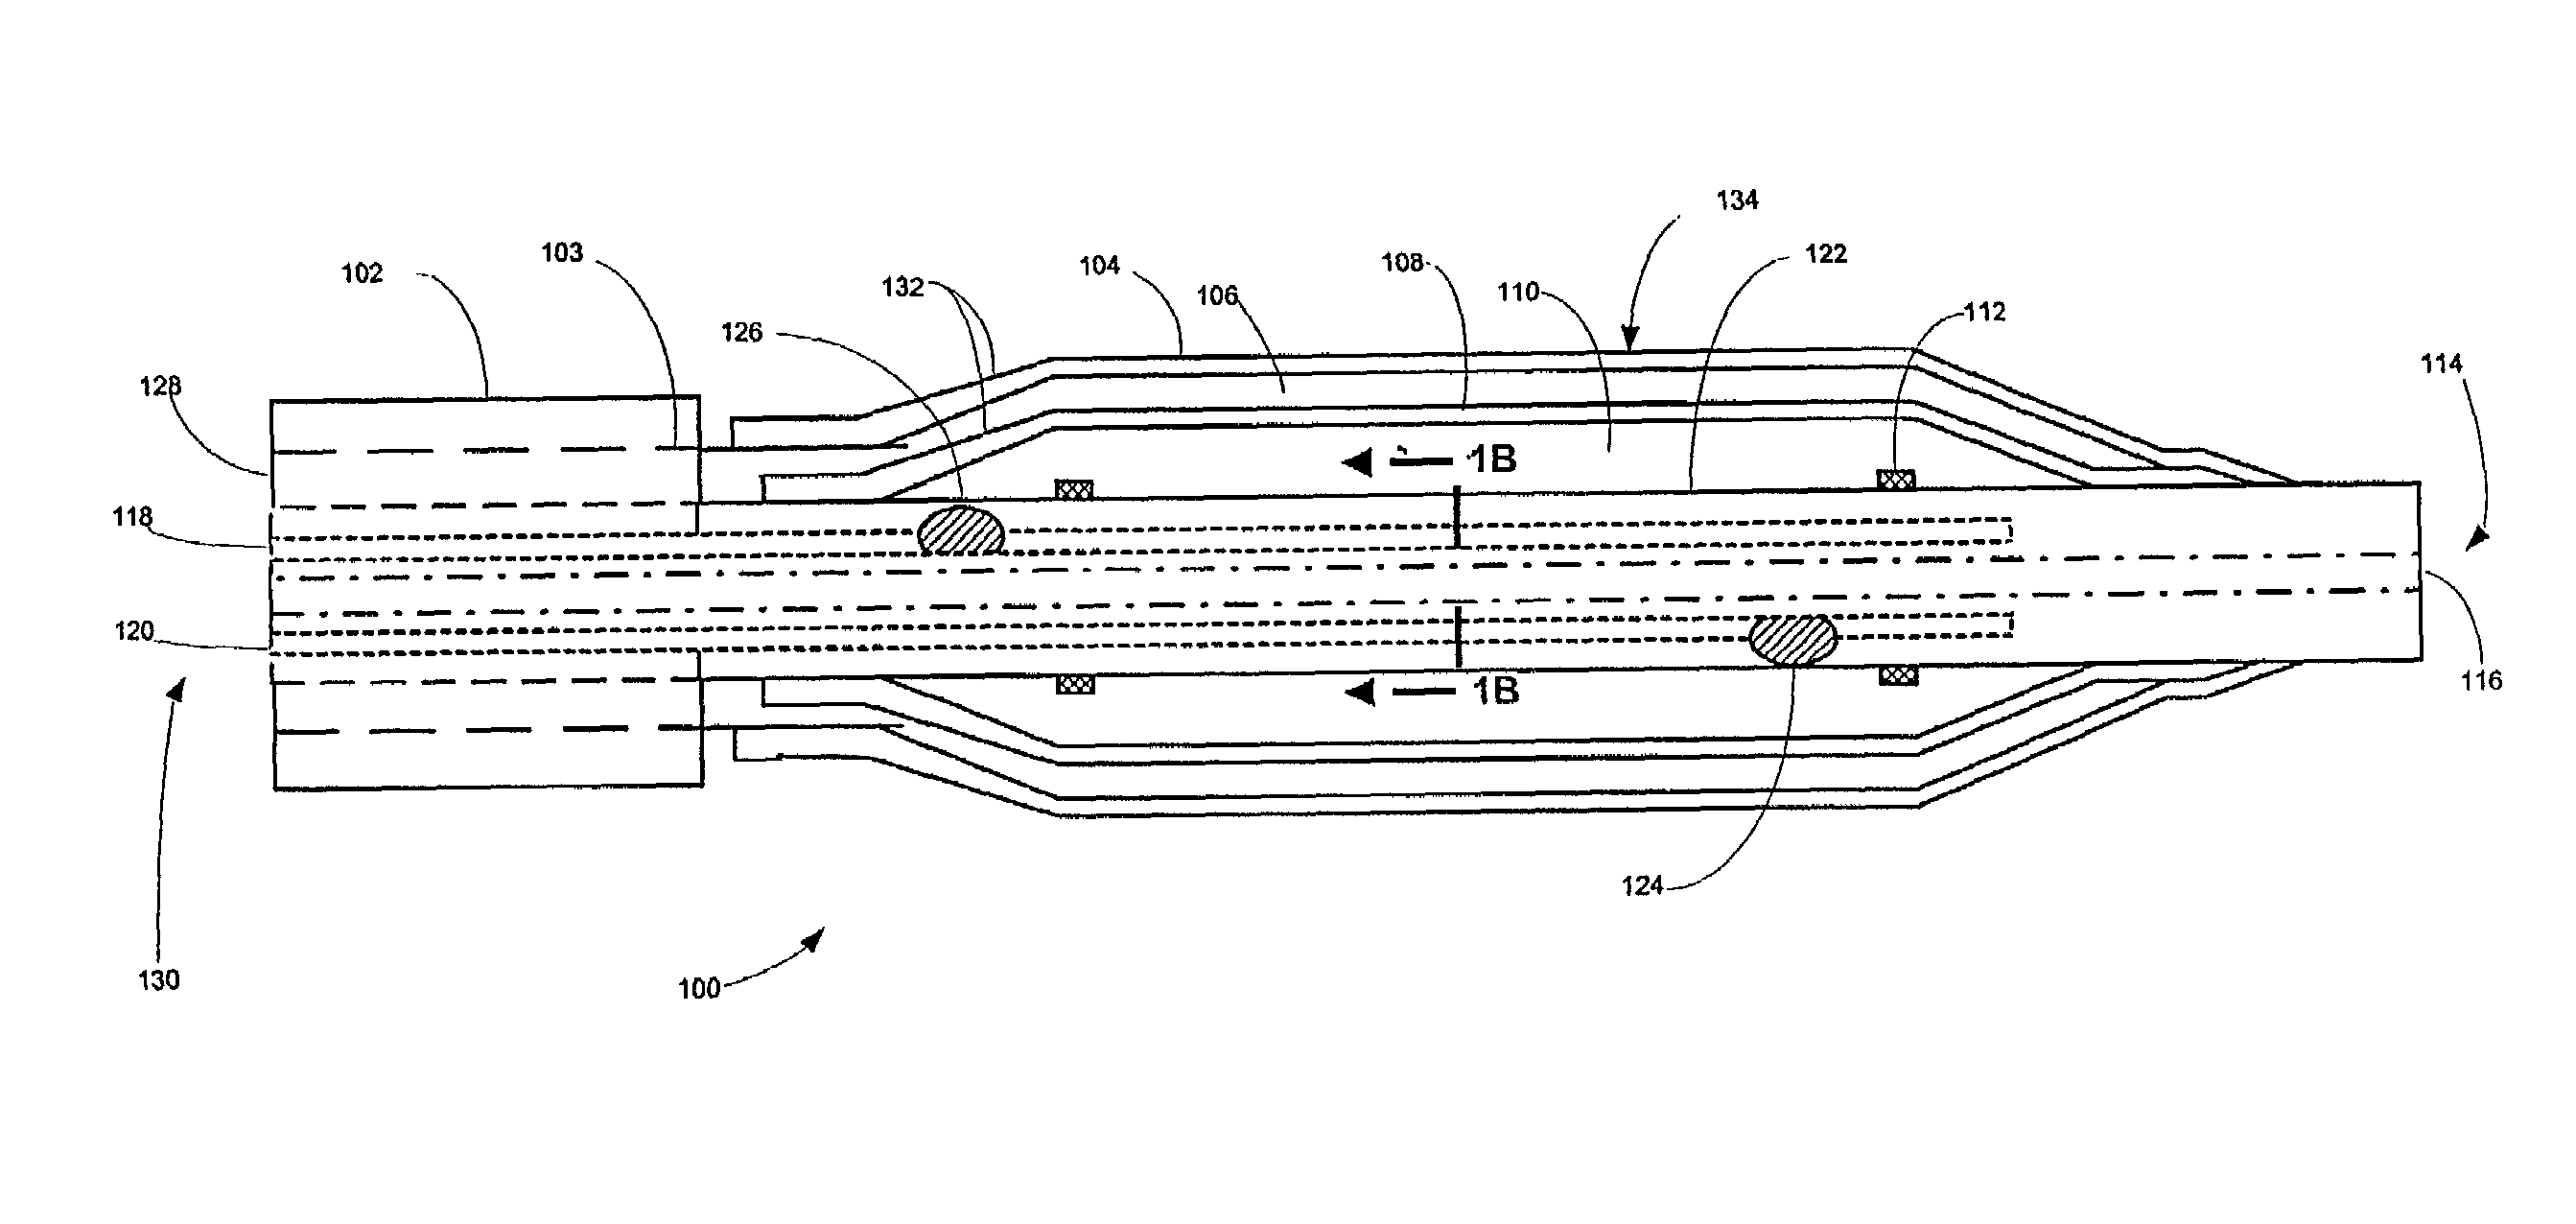 Method and device for performing cooling- or cryo-therapies for, e.g., angioplasty with reduced restenosis or pulmonary vein cell necrosis to inhibit atrial fibrillation